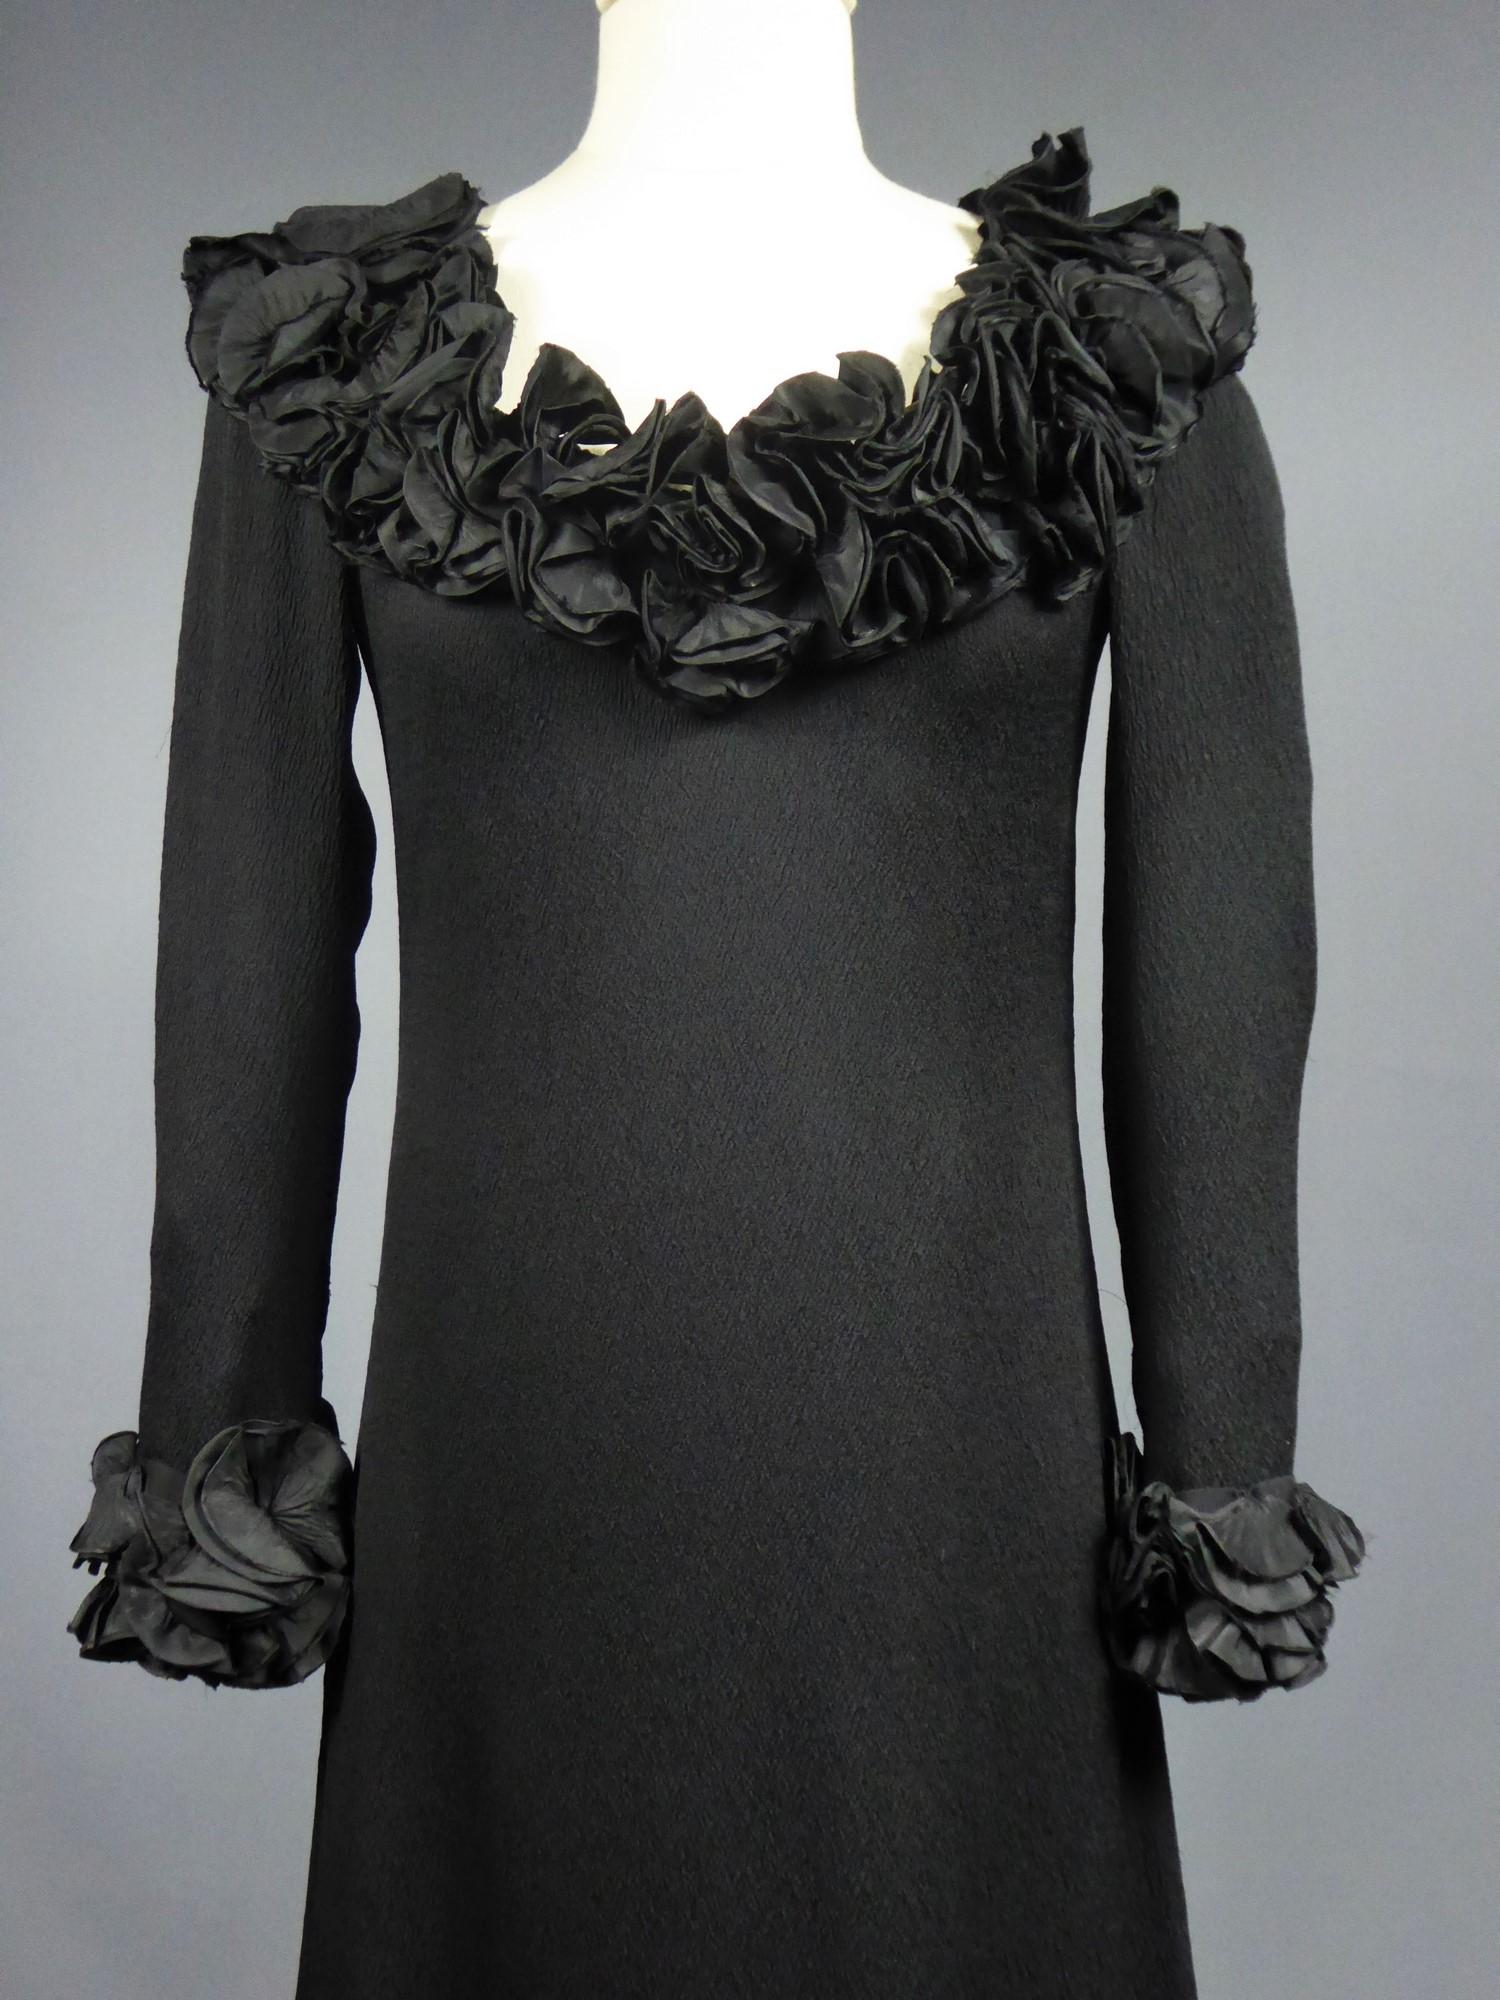 Little Black Dress by Yves Saint Laurent Couture Numbered 34406 Circa 1973 1